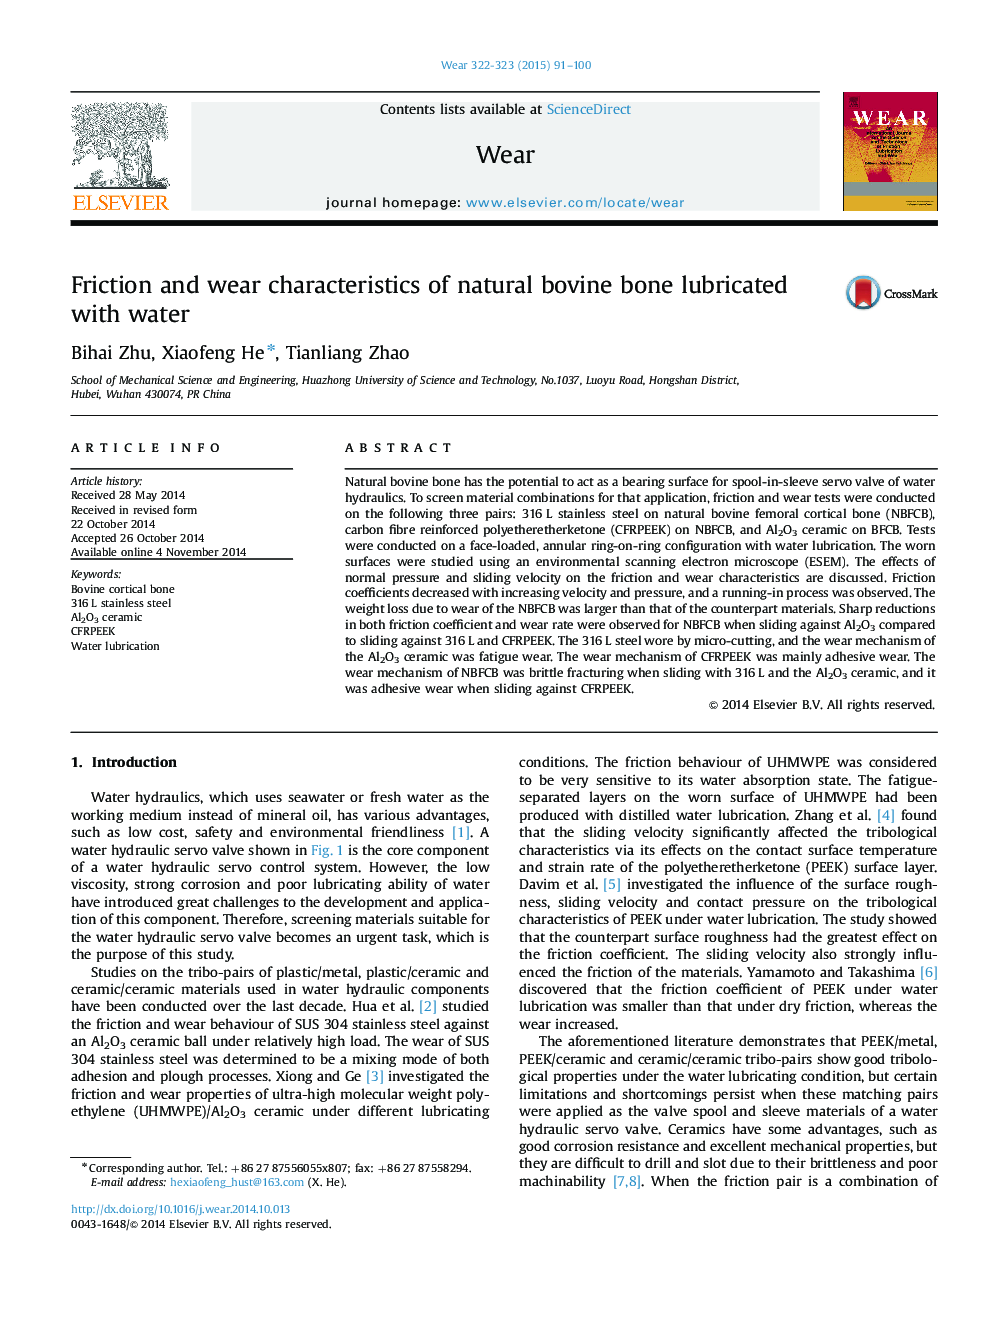 Friction and wear characteristics of natural bovine bone lubricated with water